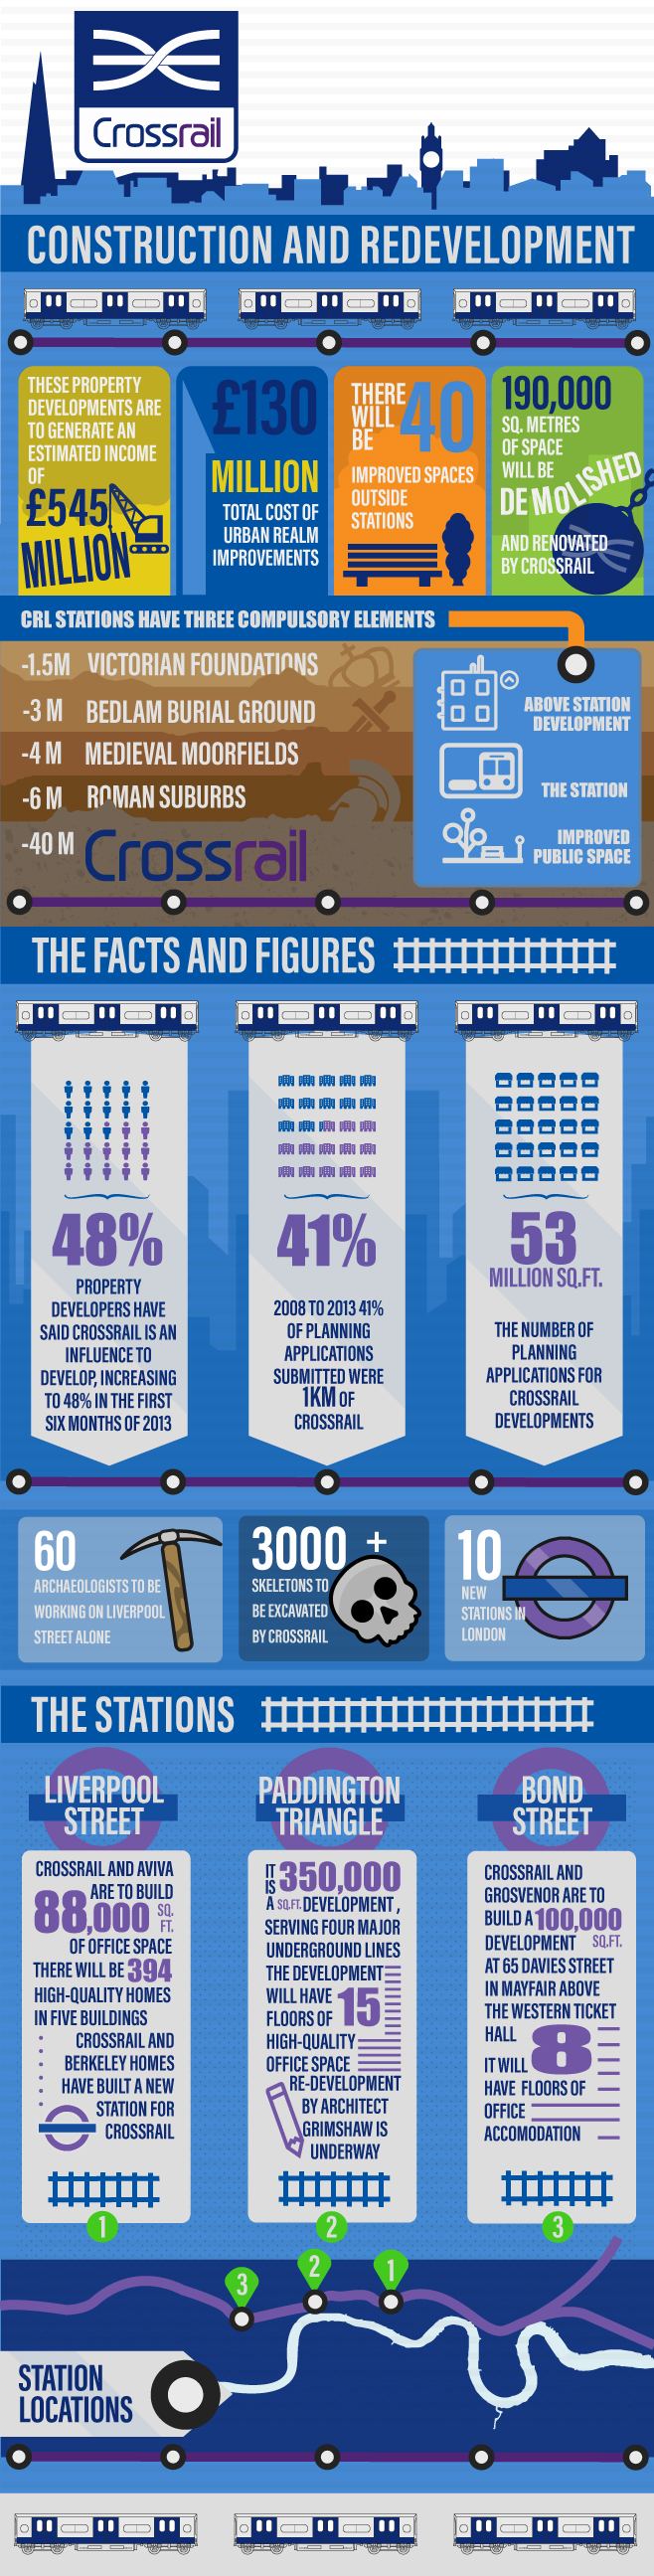 Crossrail-Commercial-infographic